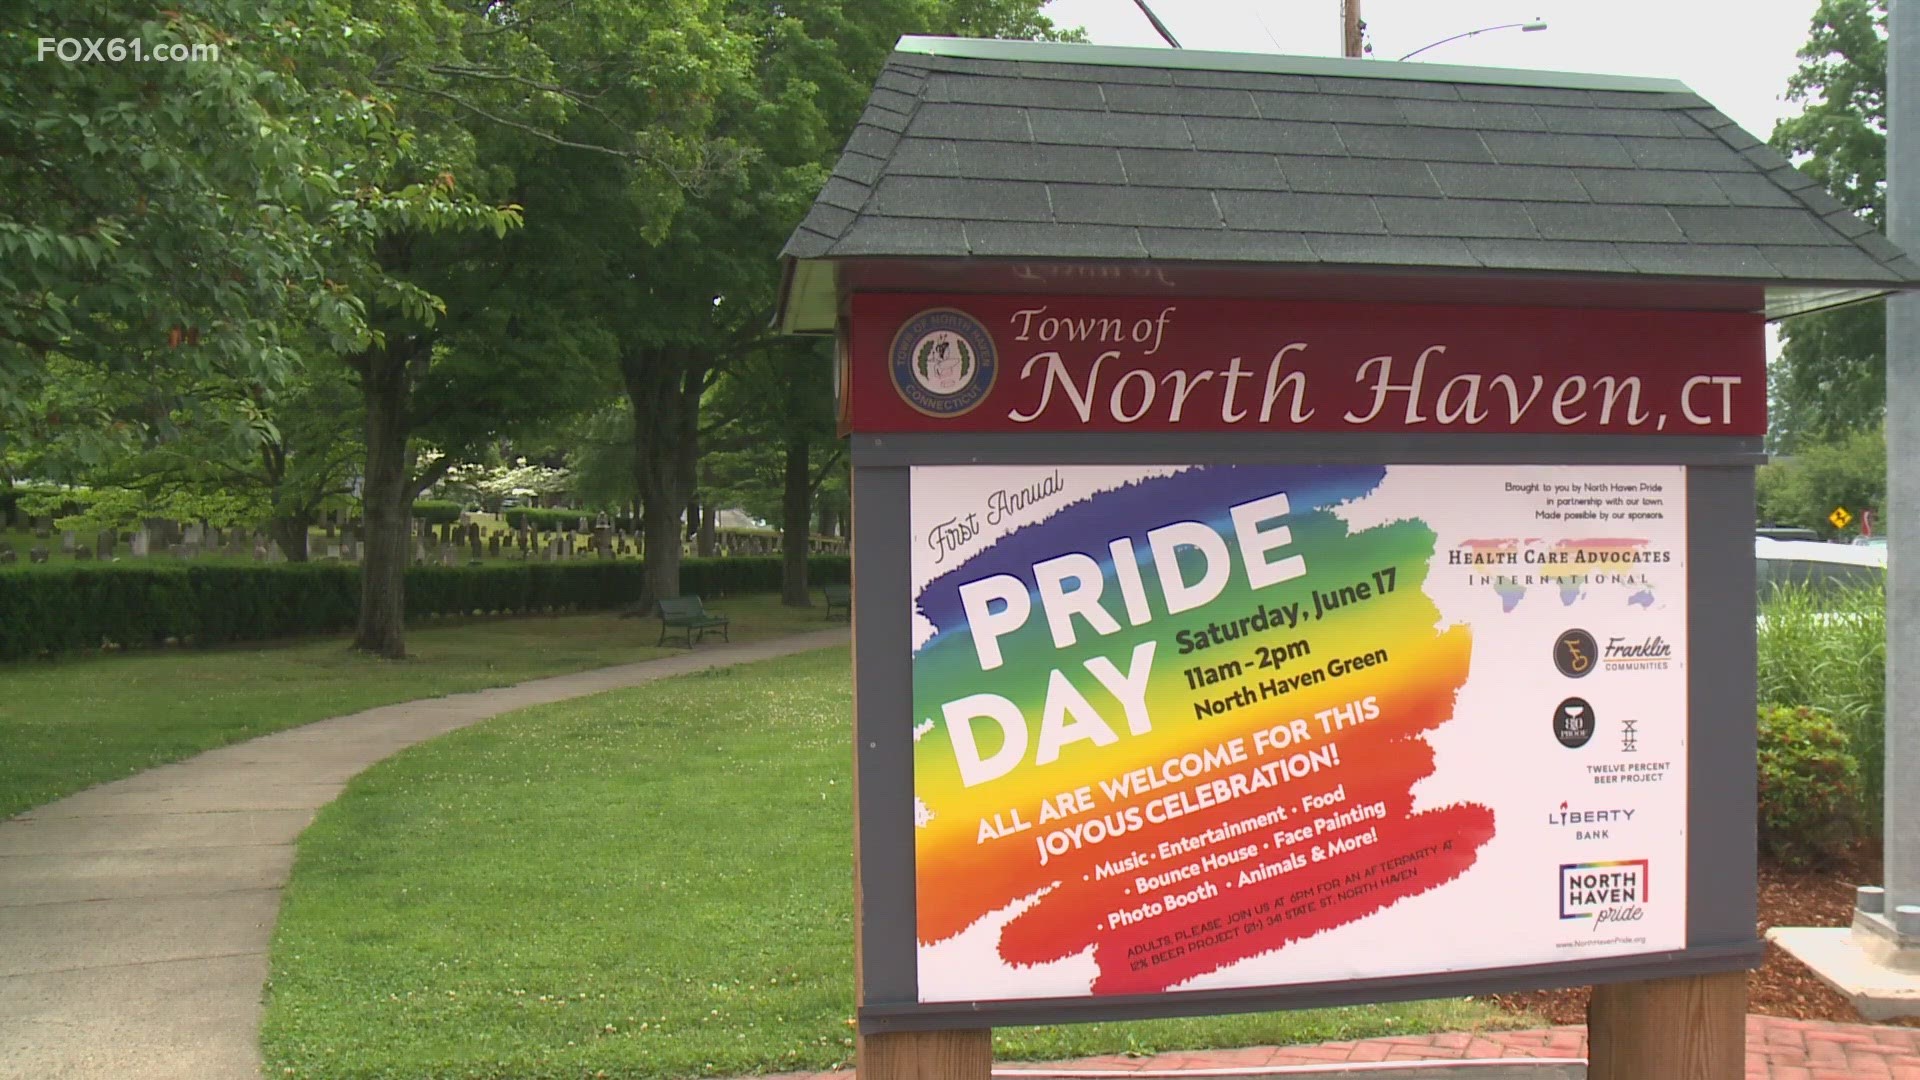 For the first time in the town's history, North Haven will be hosting a Pride celebration on Saturday, June 17th. The event is free and open to the public.